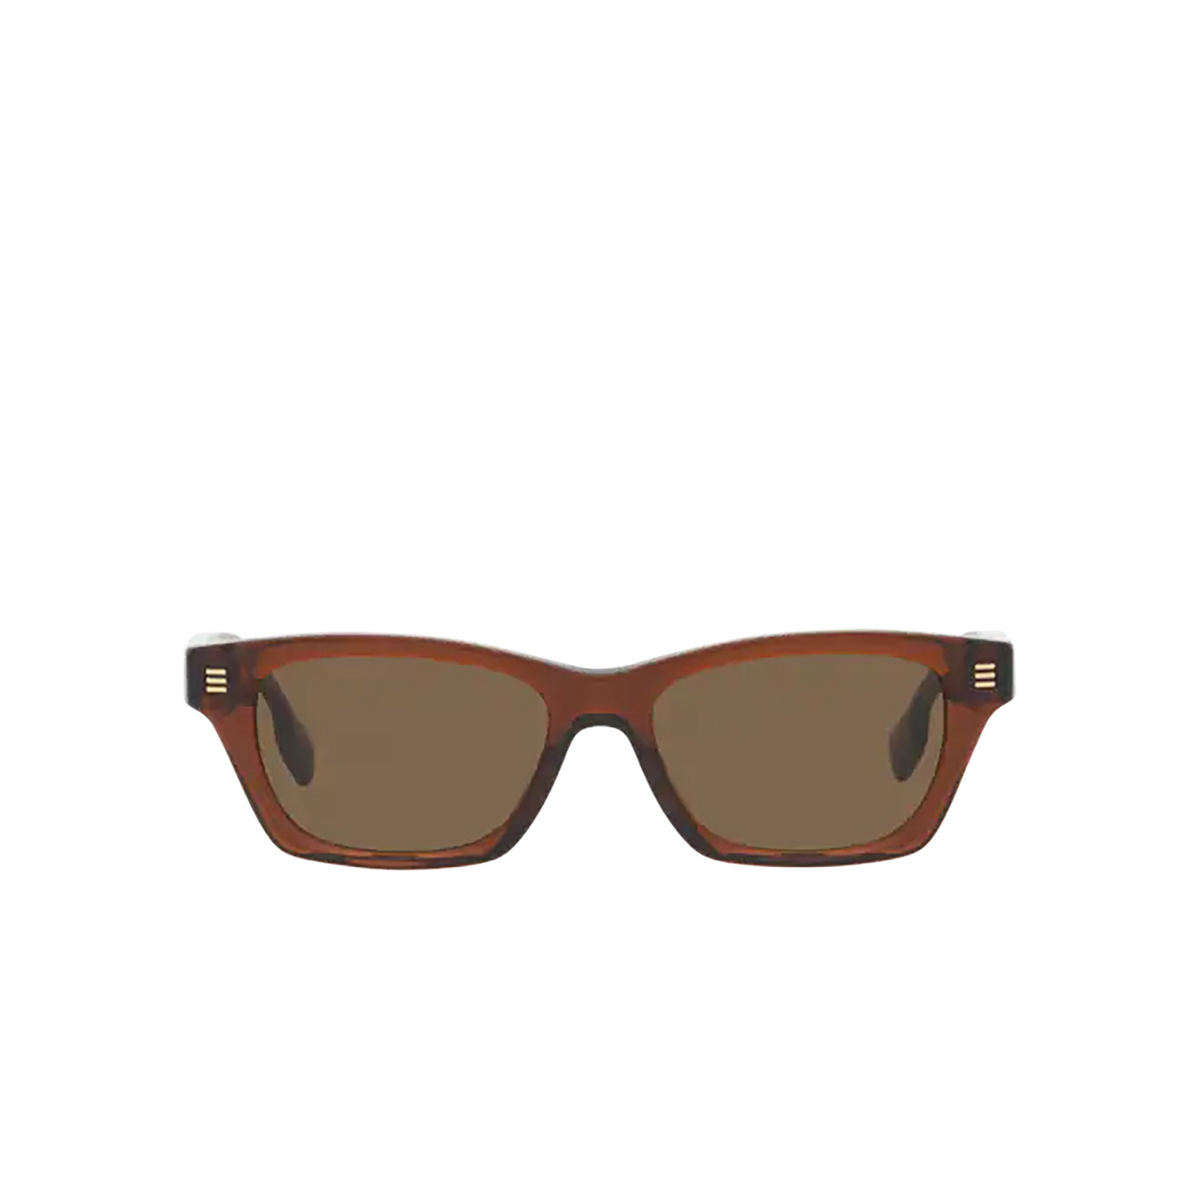 Burberry KENNEDY Sunglasses 398673 Brown - front view